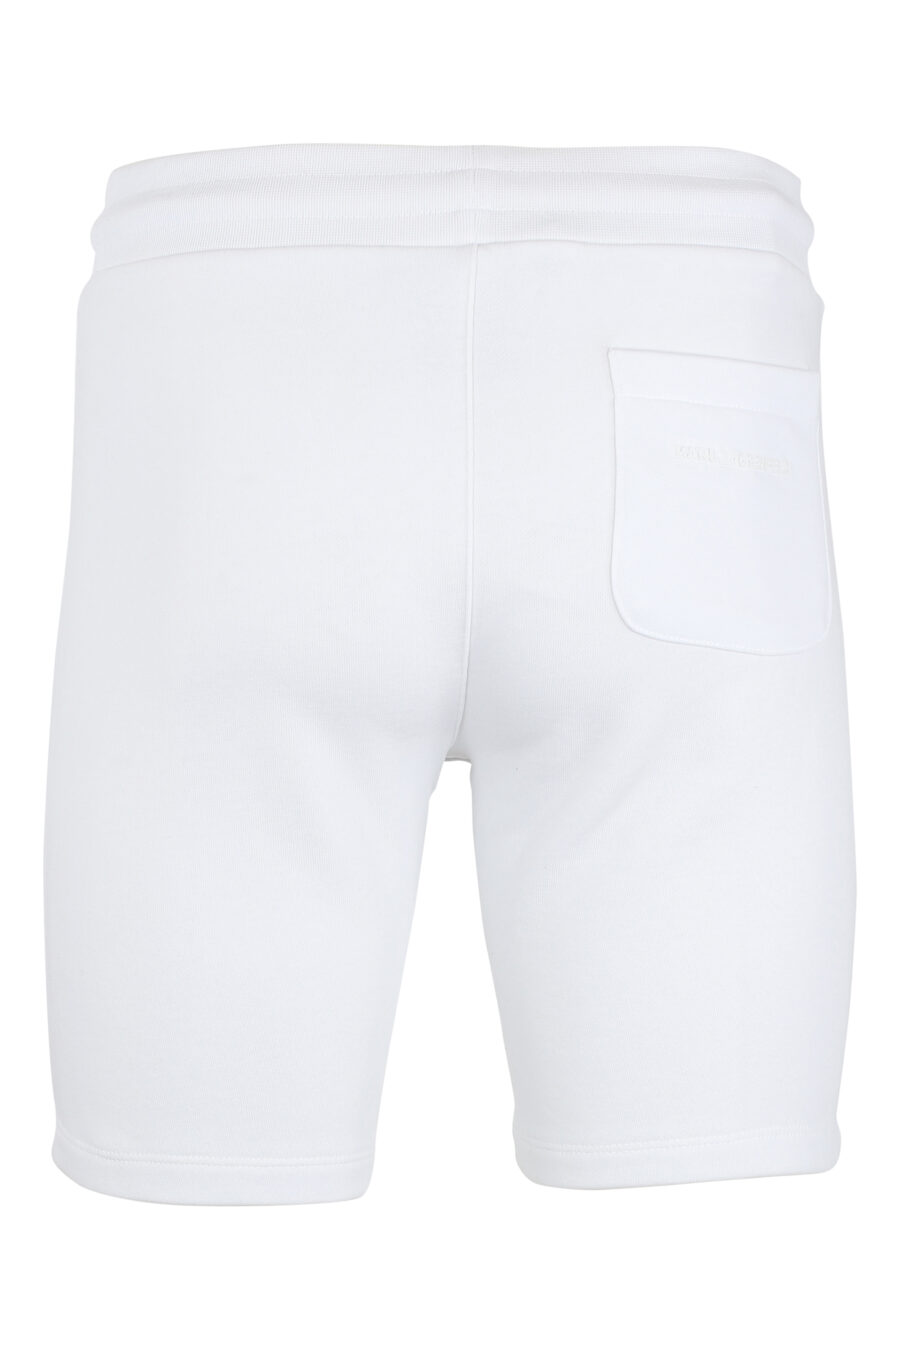 Tracksuit bottoms white short with "karl" minilogue in black silhouette - IMG 9516